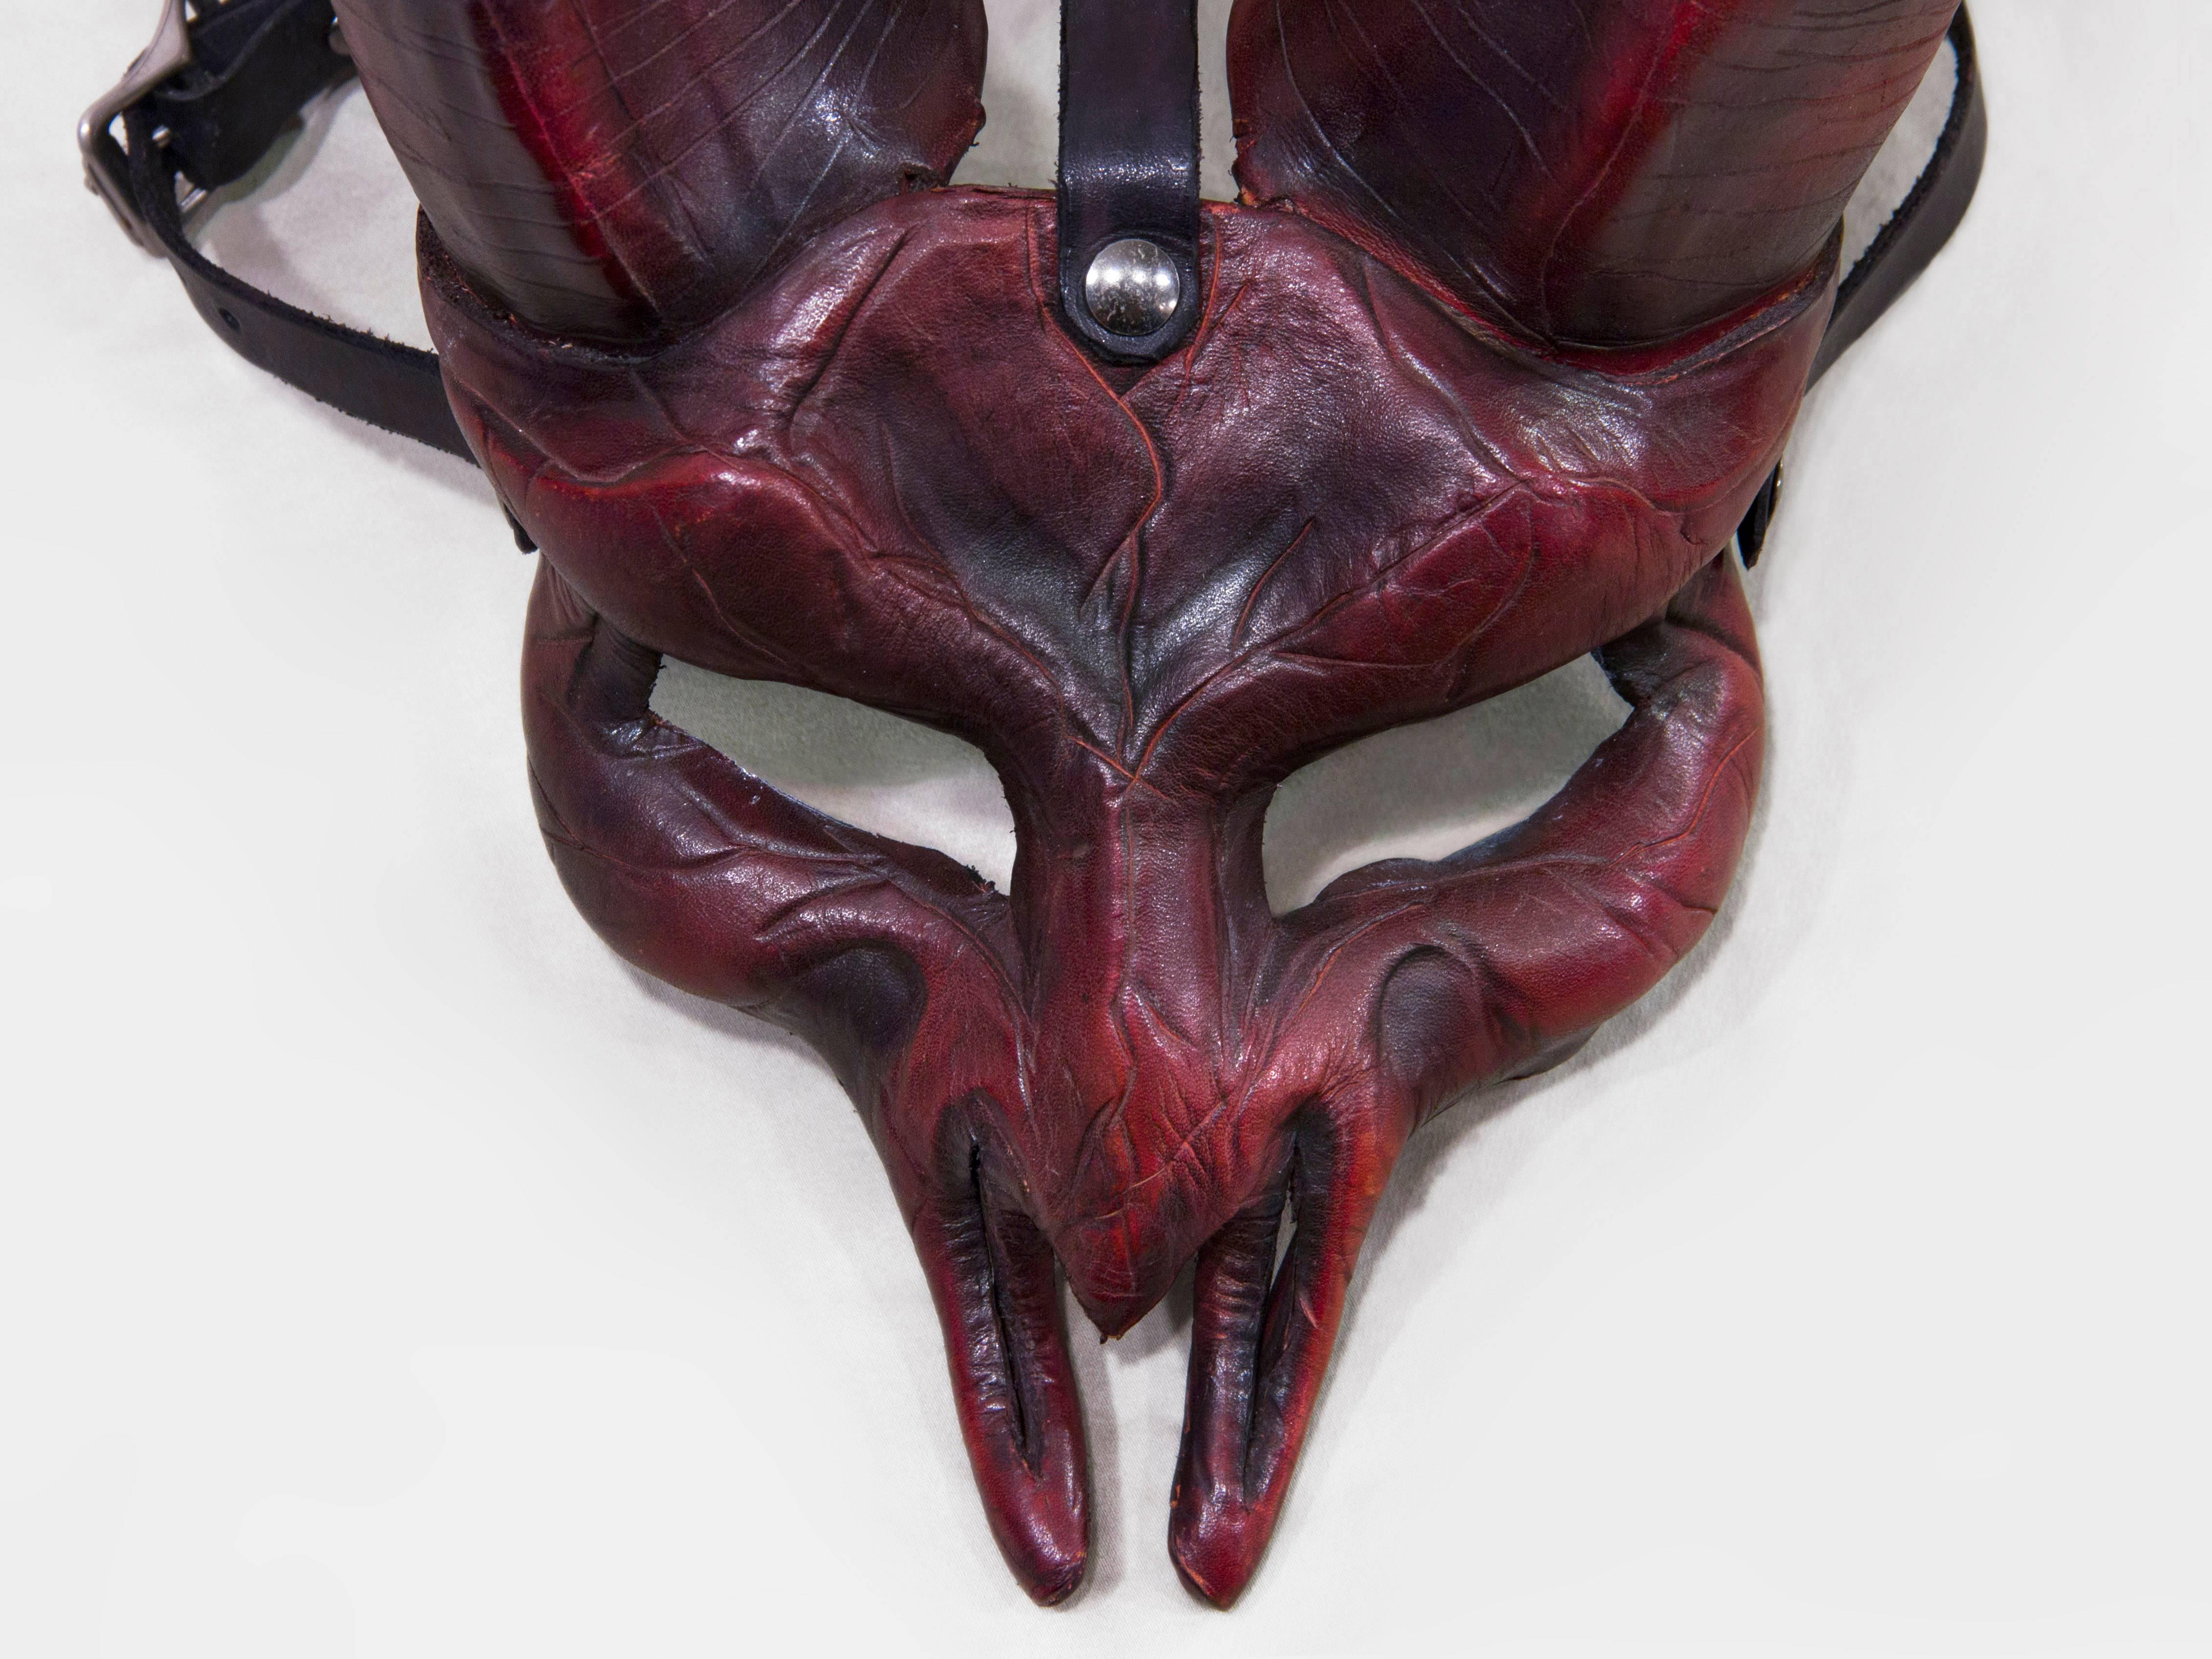 Inspired by the Ram, the symbol of Aries. Dark reds and blacks drape this deliciously sinister Silhouette. This piece is wearable art, making it perfect for a masquerade, costume party, Halloween, or as a beautiful shelf or wall piece. Adjustable